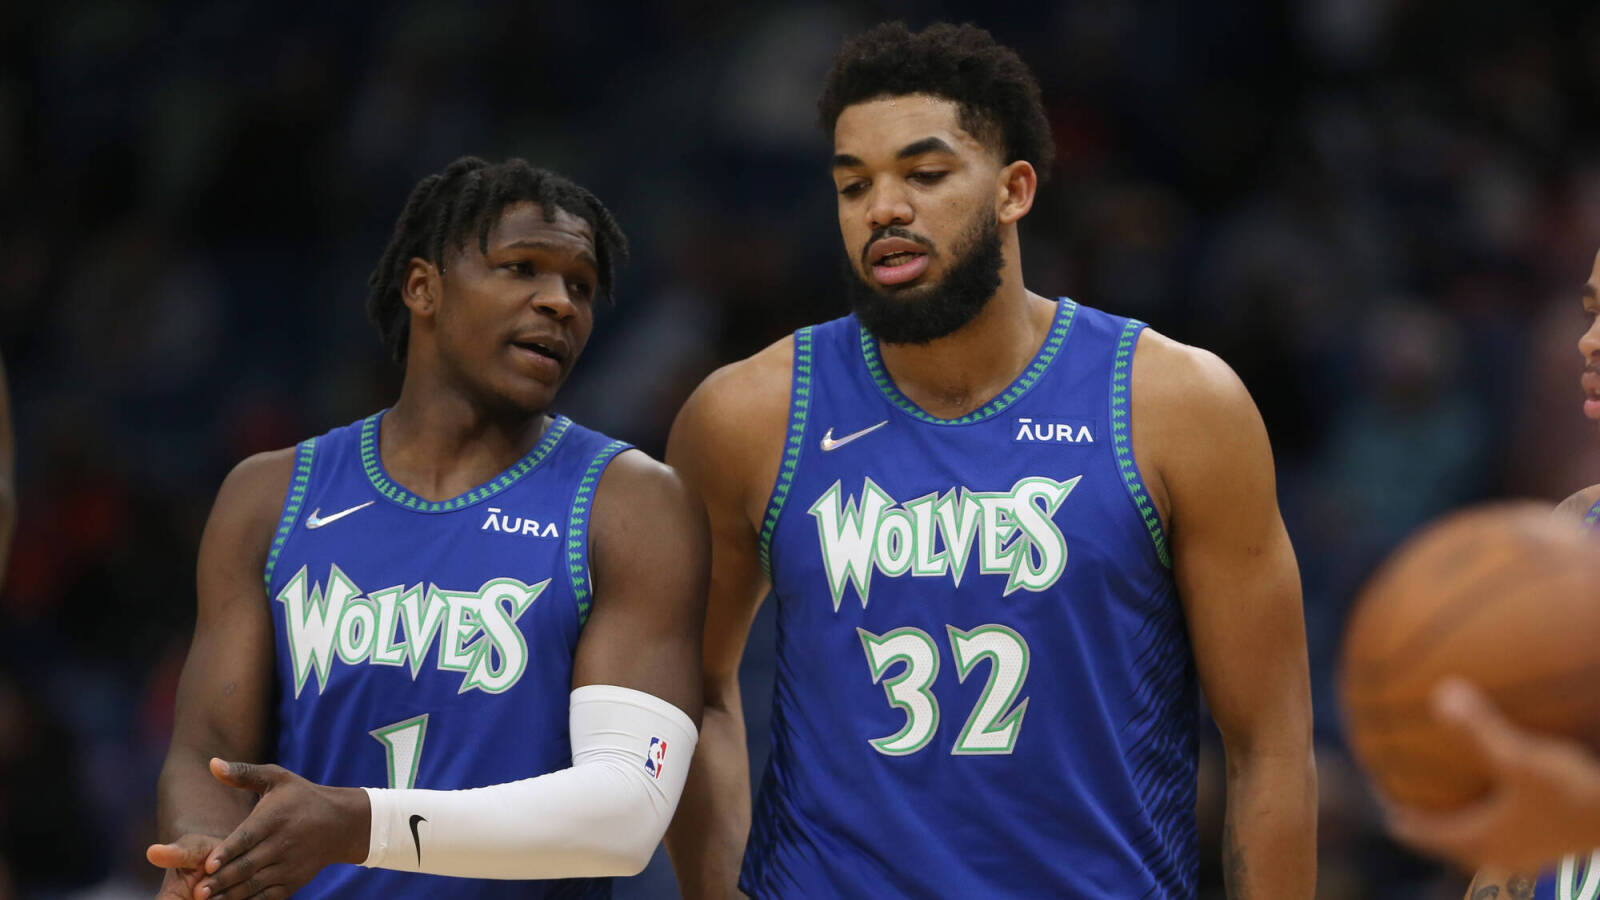 If history repeats itself, Timberwolves will win NBA title